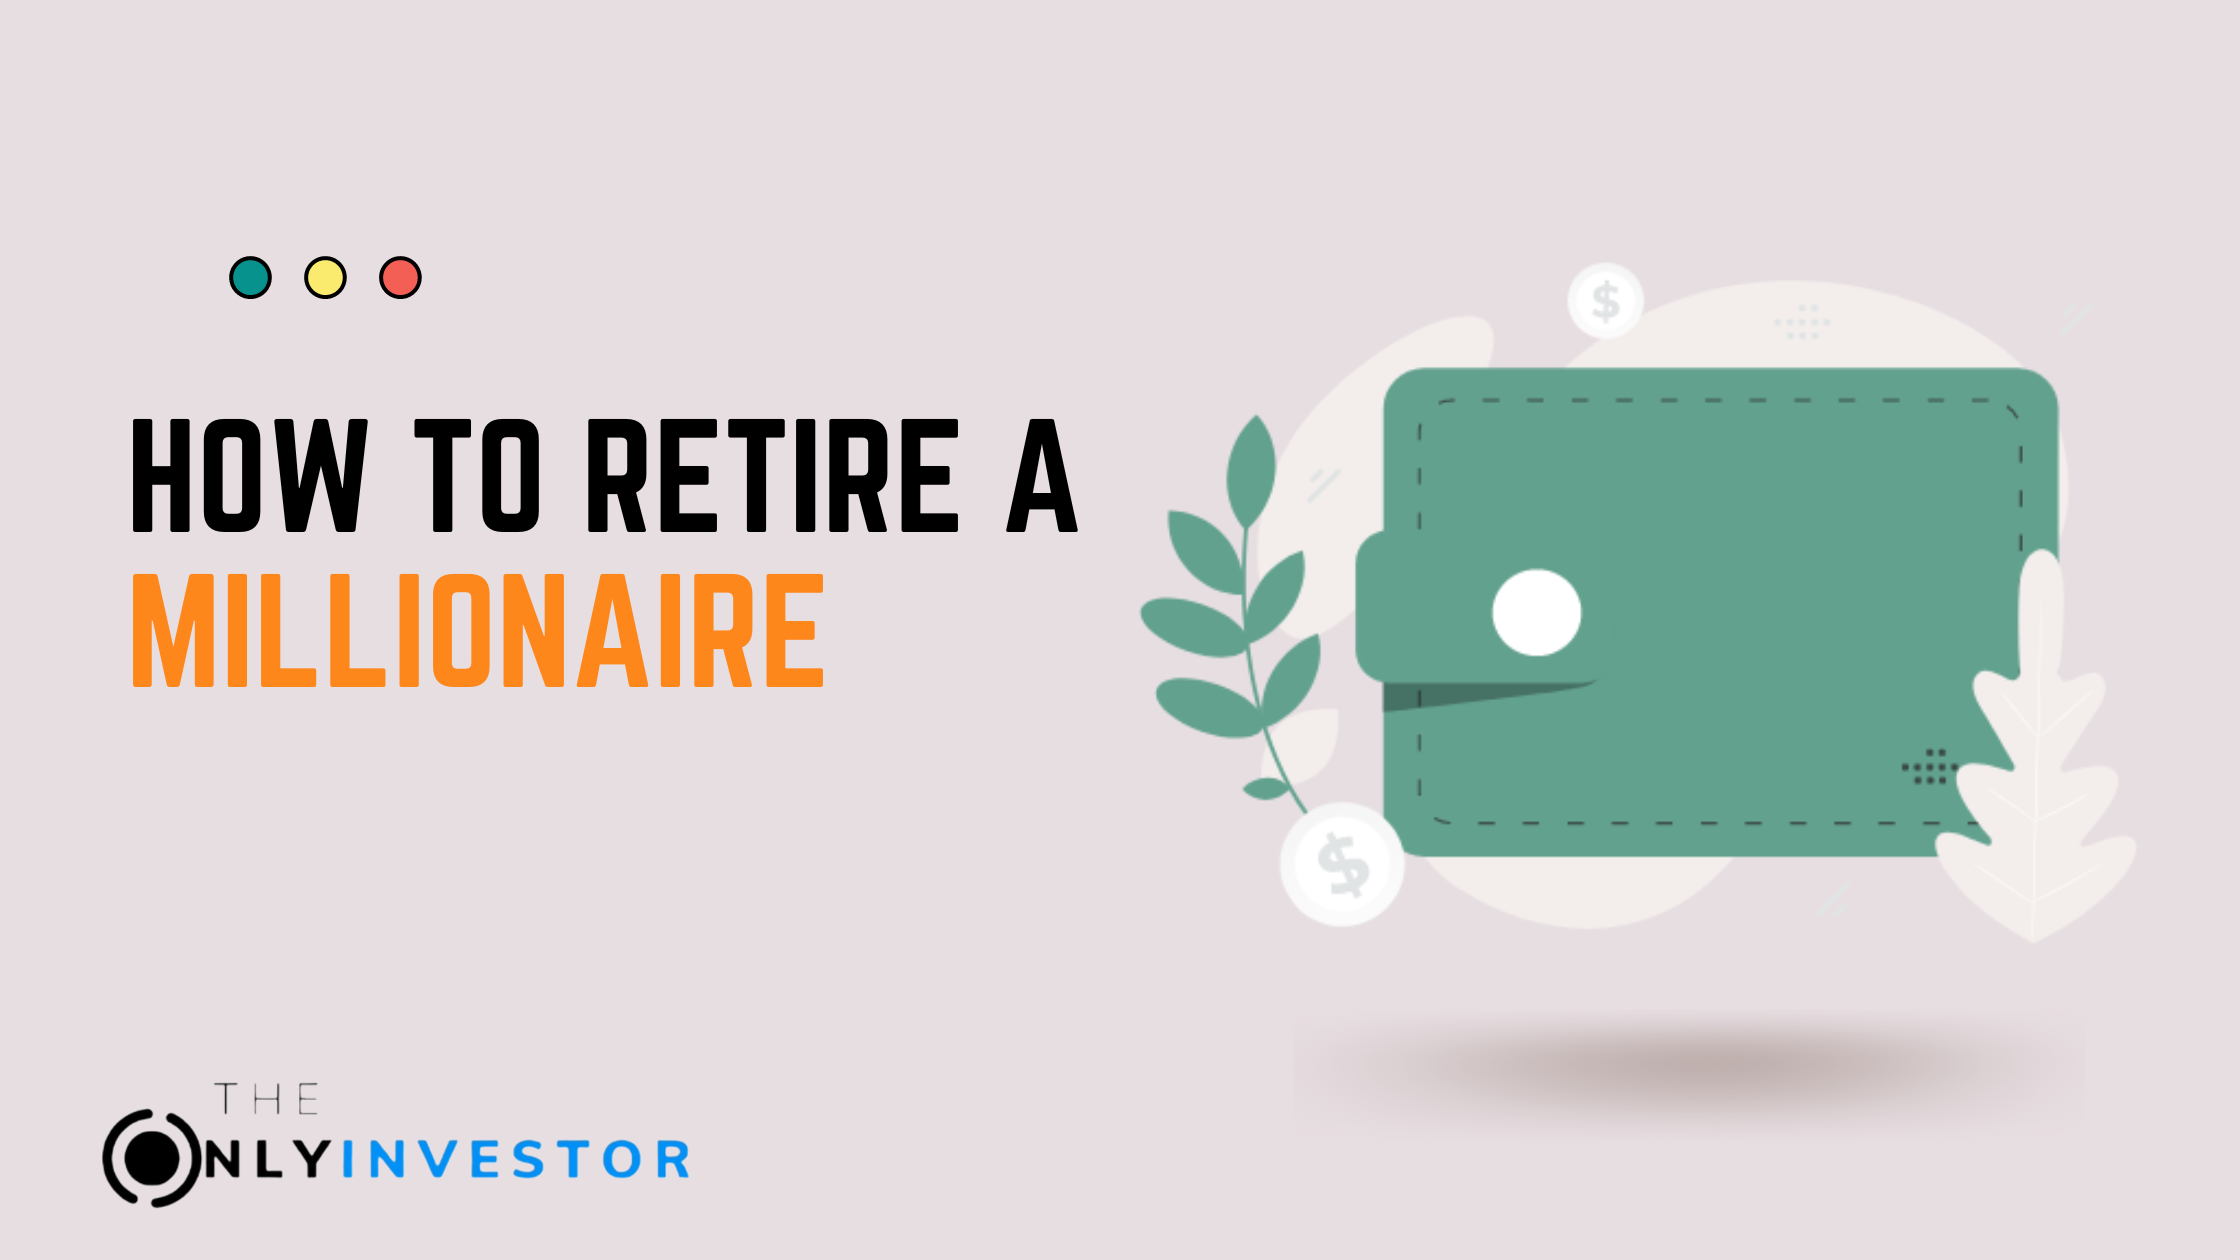 How to retire a millionaire – A 10-step GUIDE